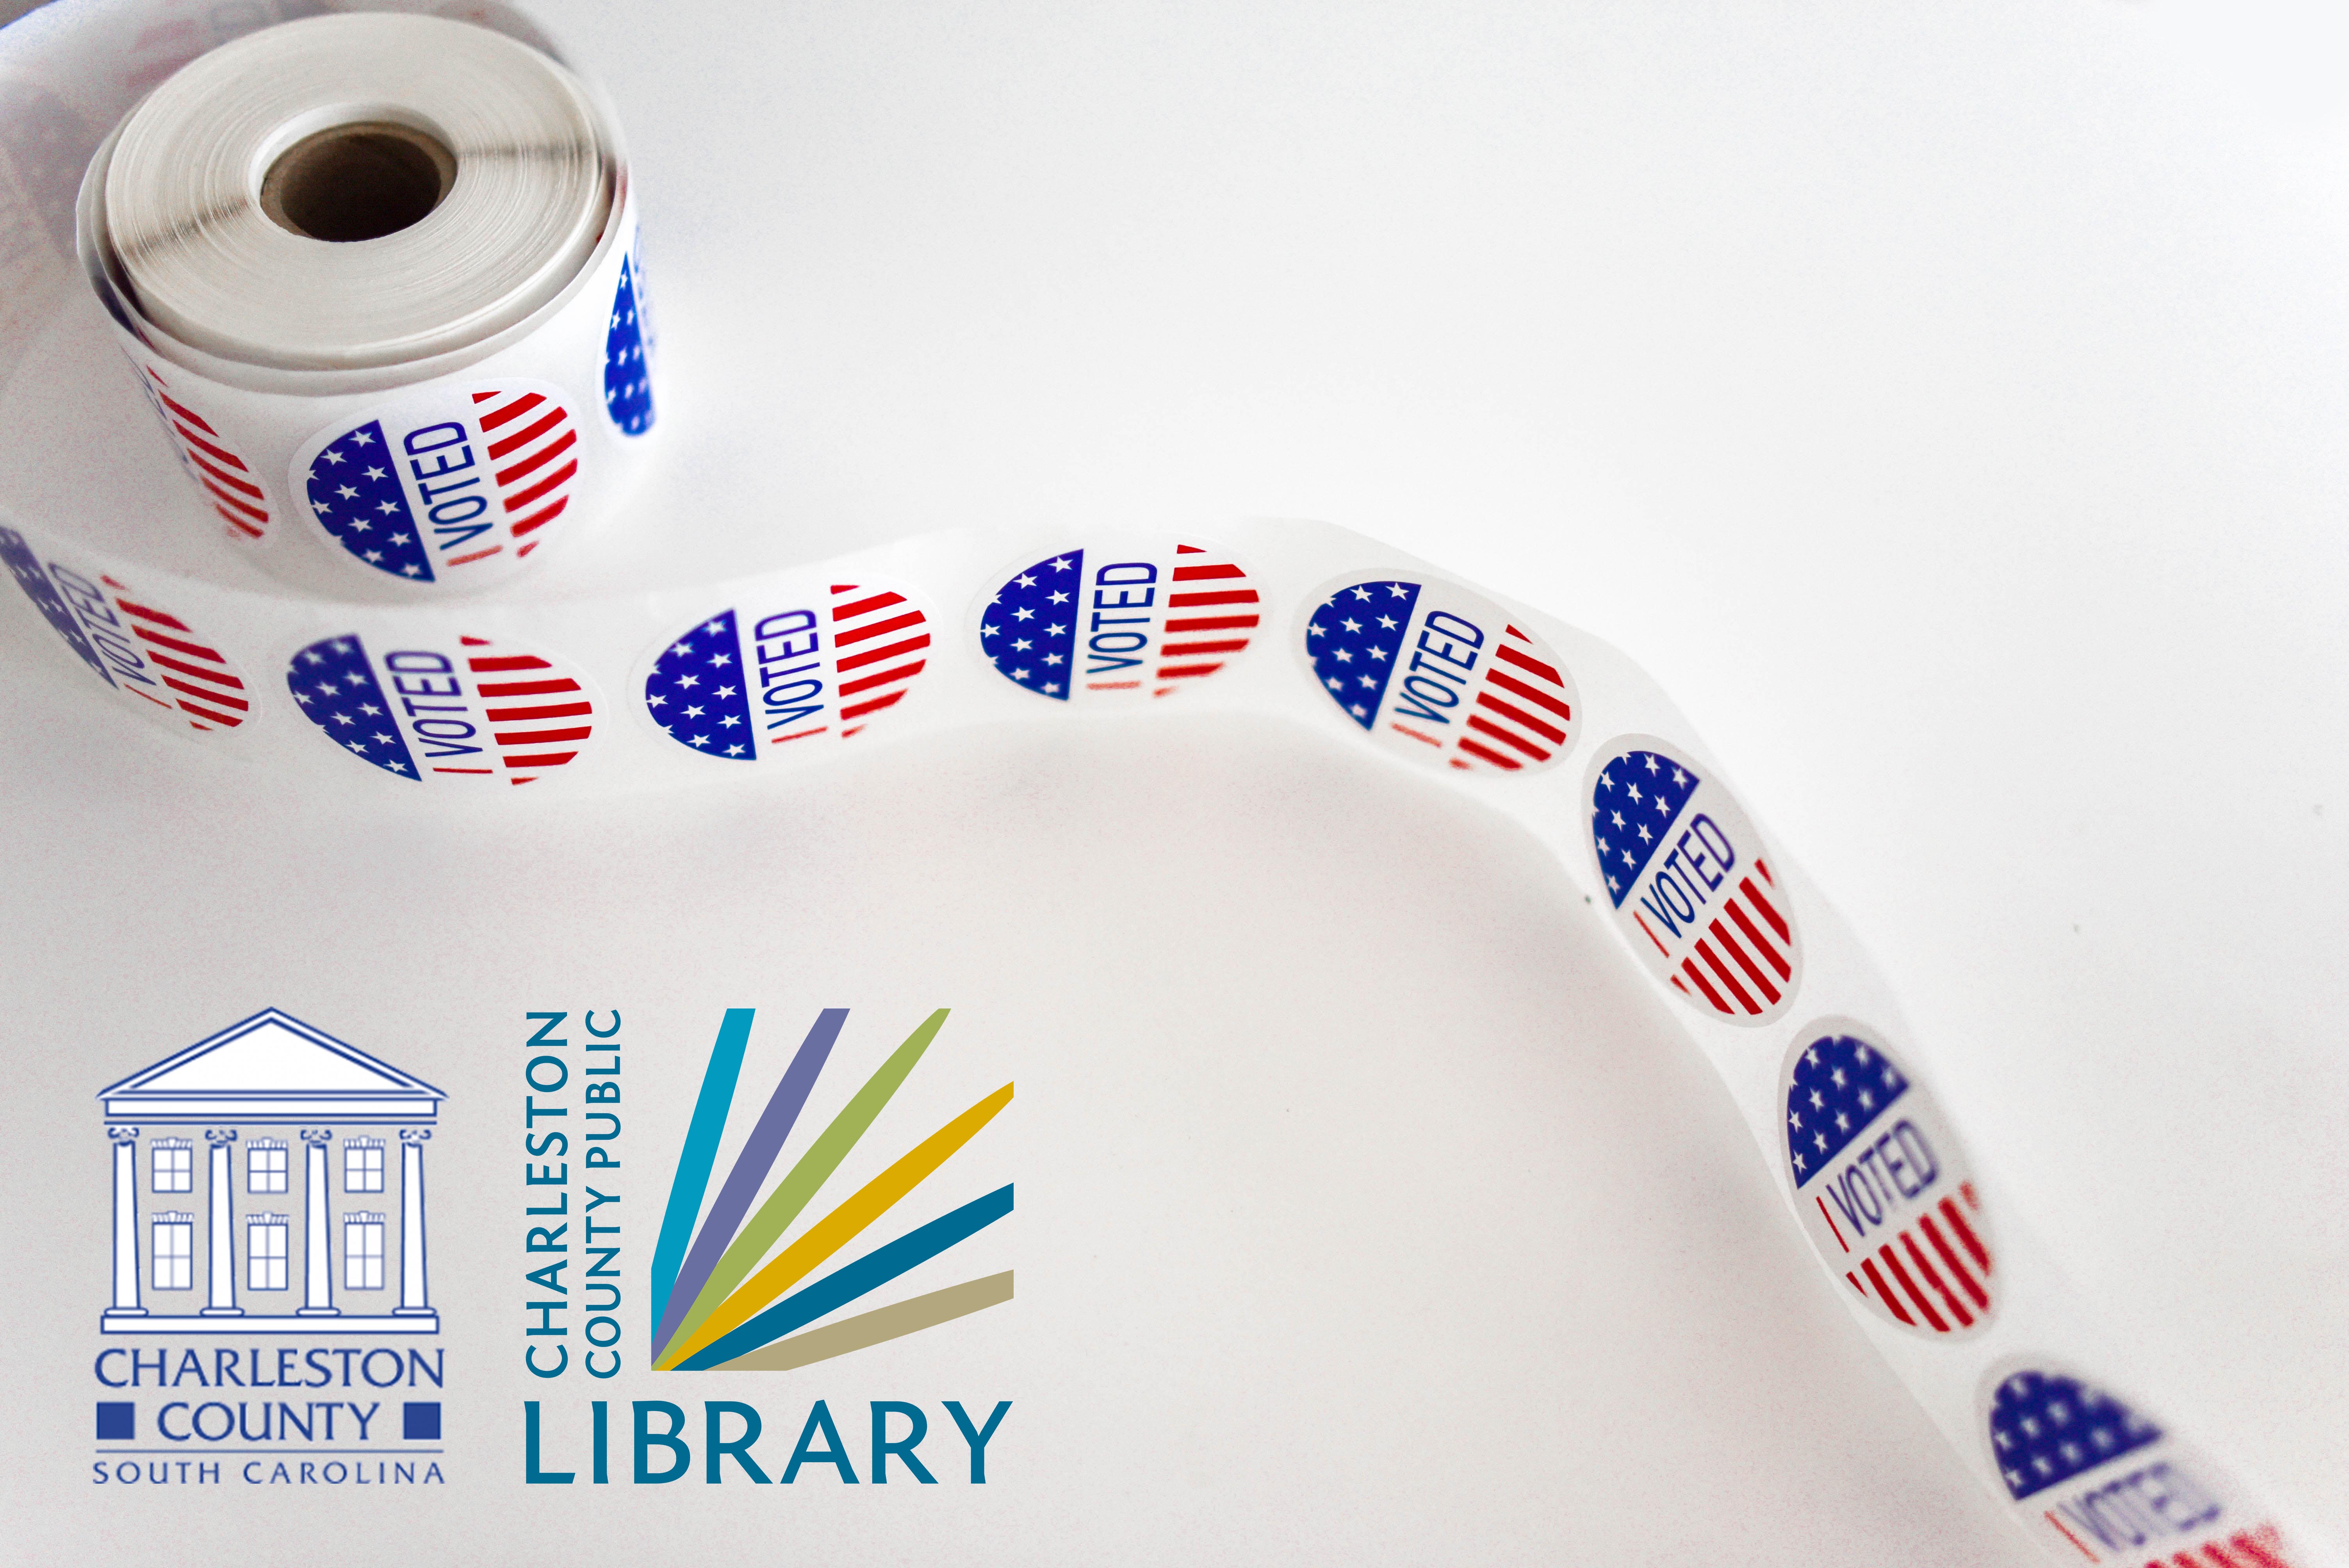 Voting Available at Four CCPL Branches on June 14, Primary Election Day